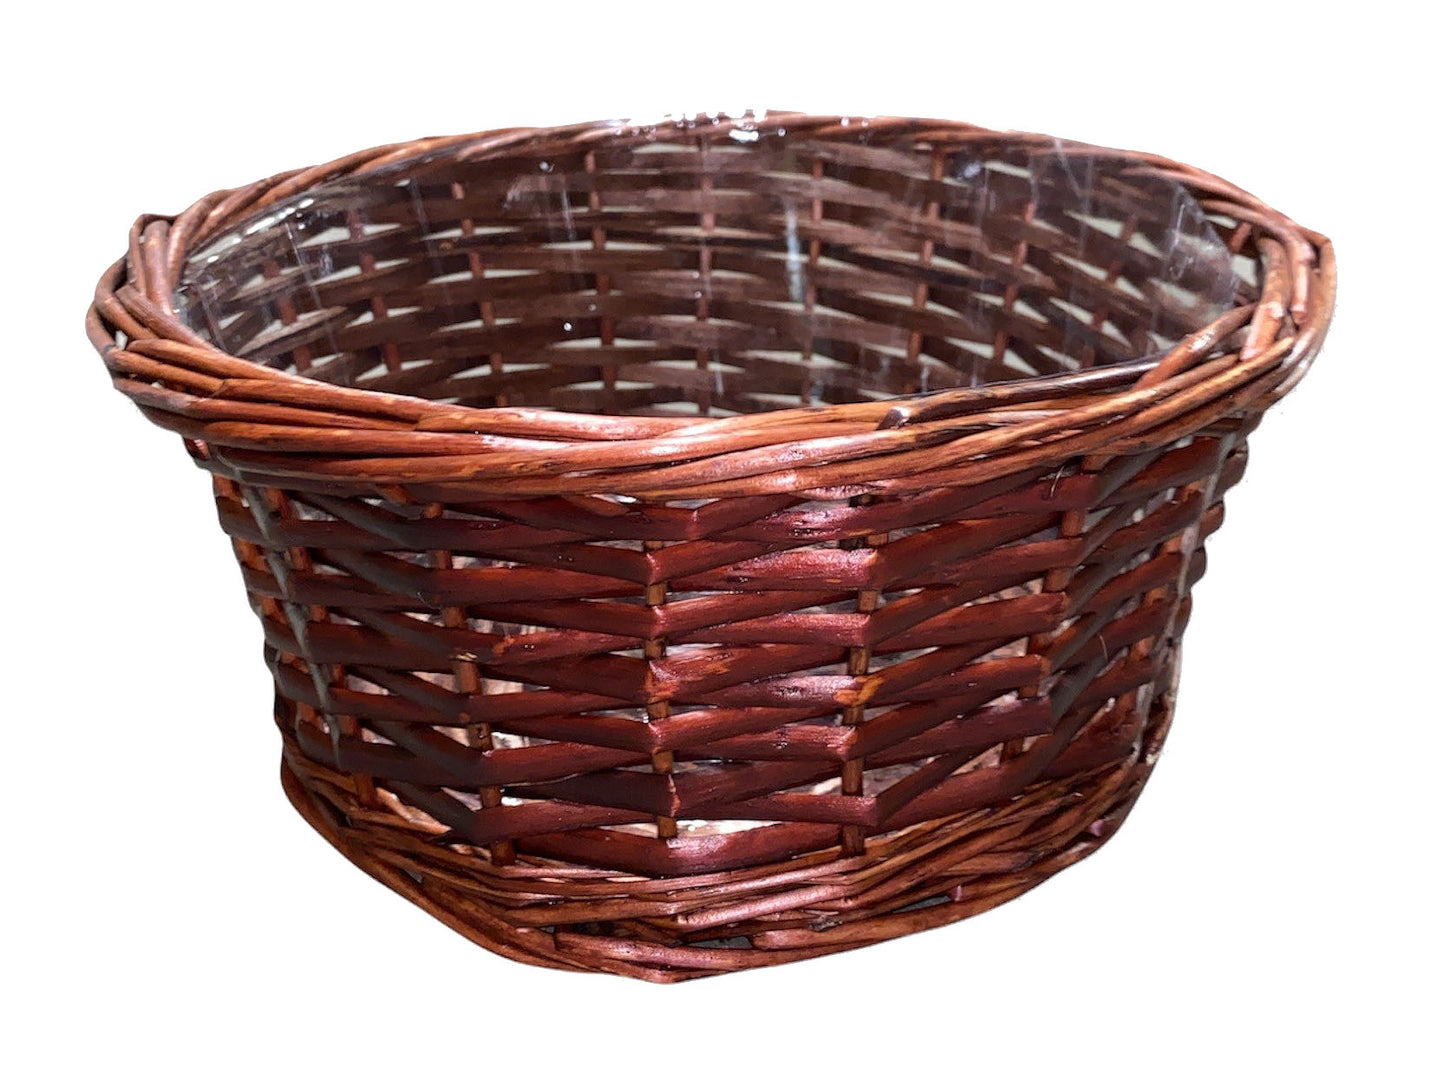 Round Split WILLOW TRAY - 14.36 x 4.78 inch deep - STAINED BROWN - with Hard Liner - fits a 25x30 basket bag - NEW222